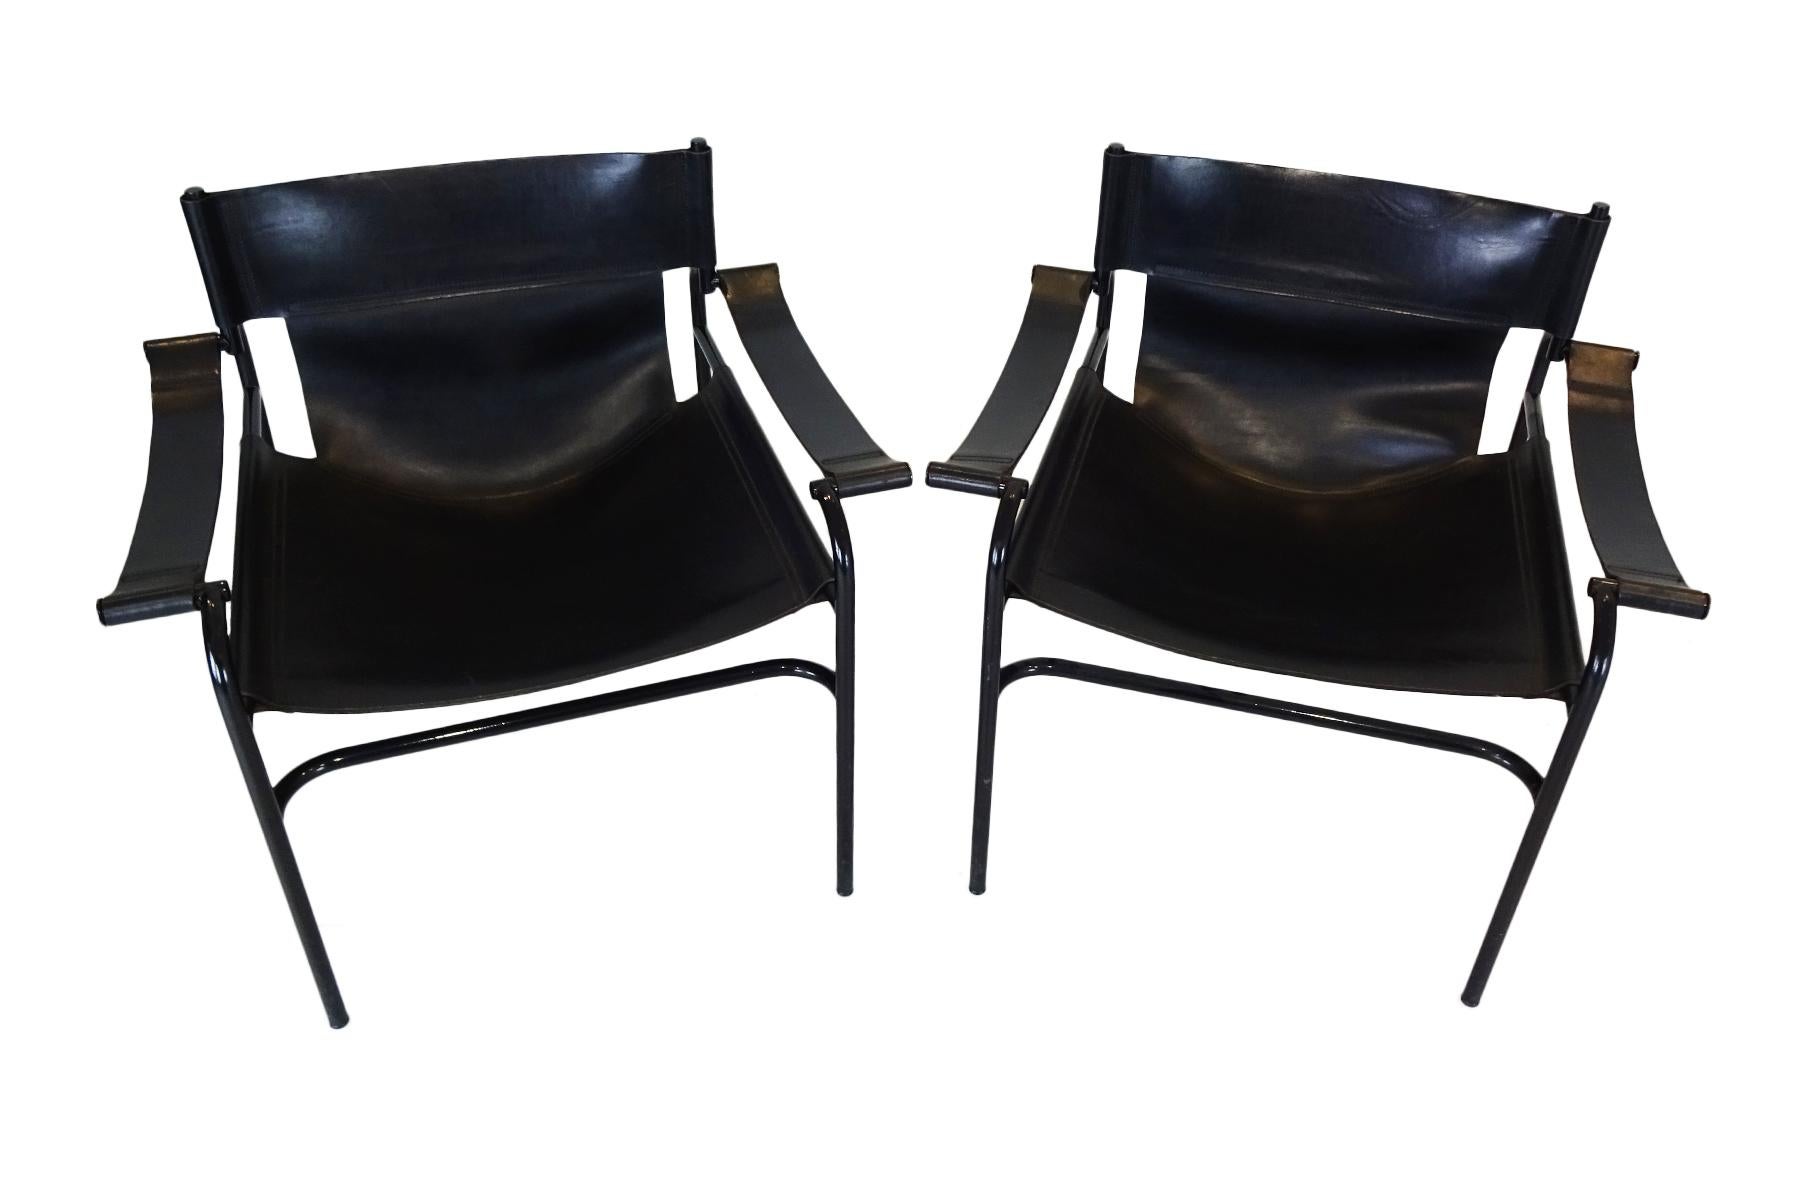 A pair of very rare black chrome and leather late midcentury vintage lounge chairs by Walter Antonis for ‘t Spectrum.

Designer Walter Antonis (1943) made his name in industrial design and then moved into furniture design in the 1960s most notably